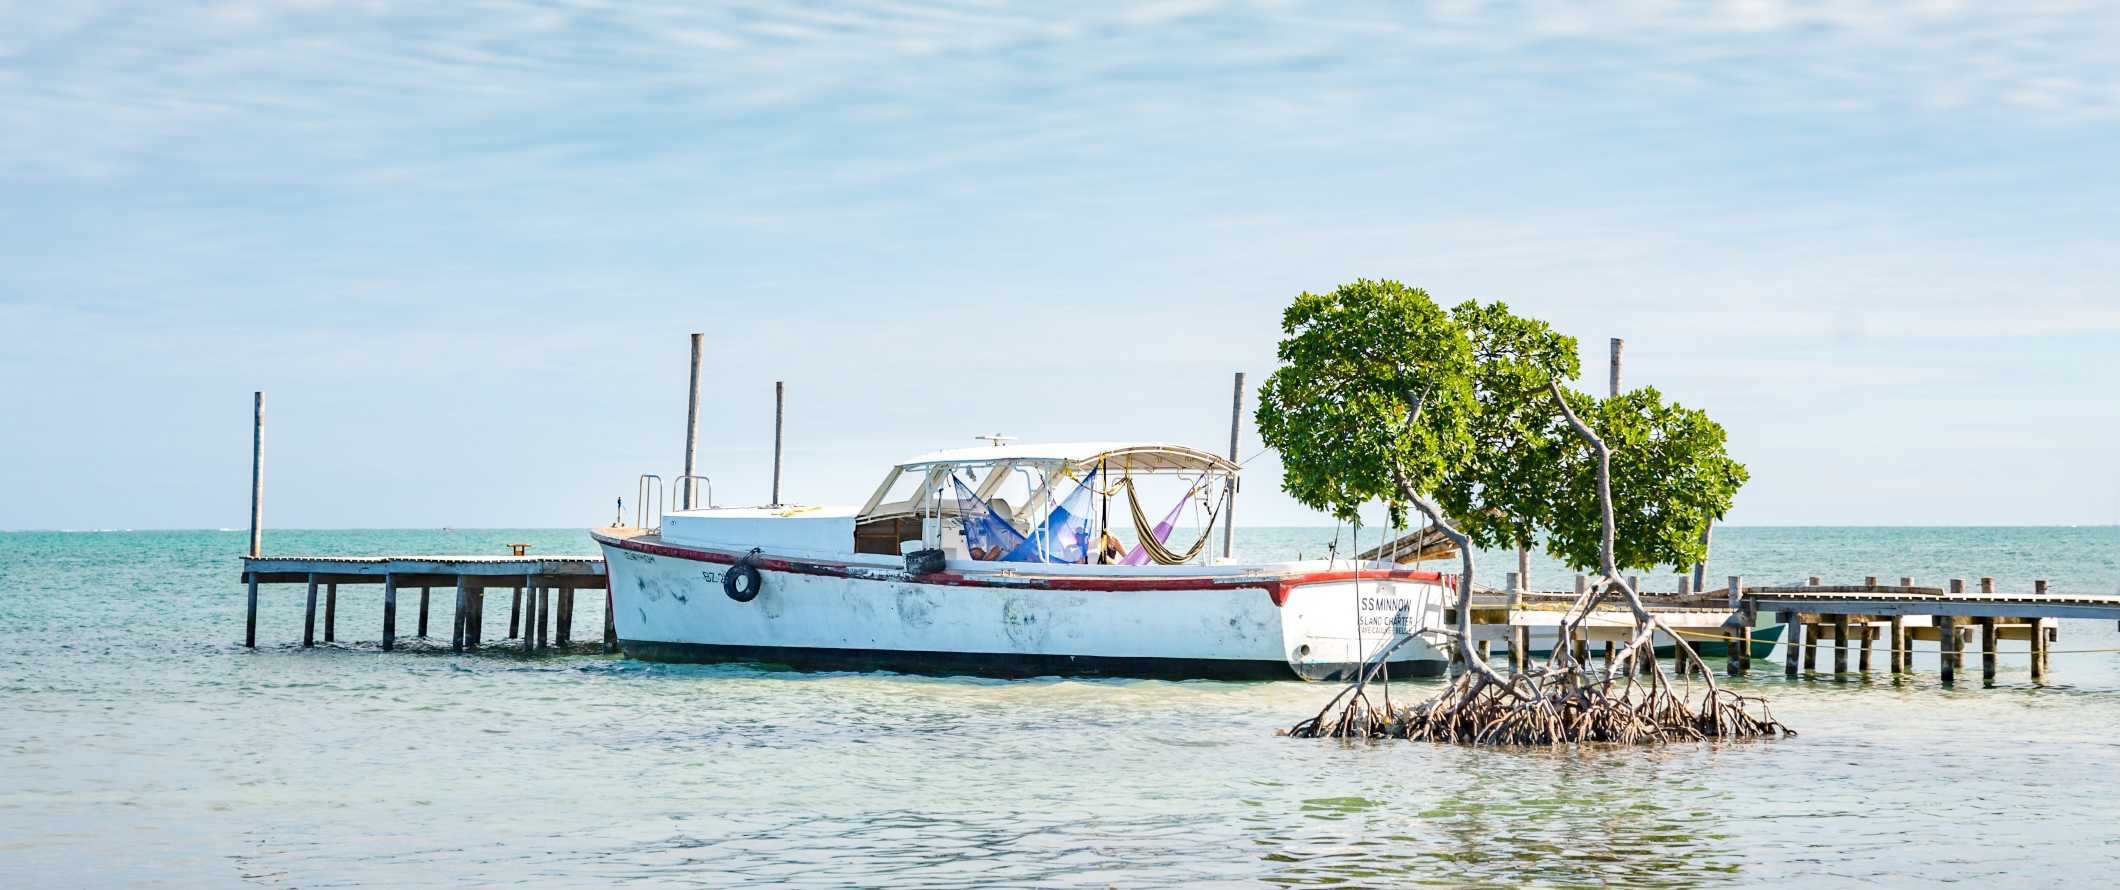 A boat at a dock in the waters of Caye Caulker, Belize